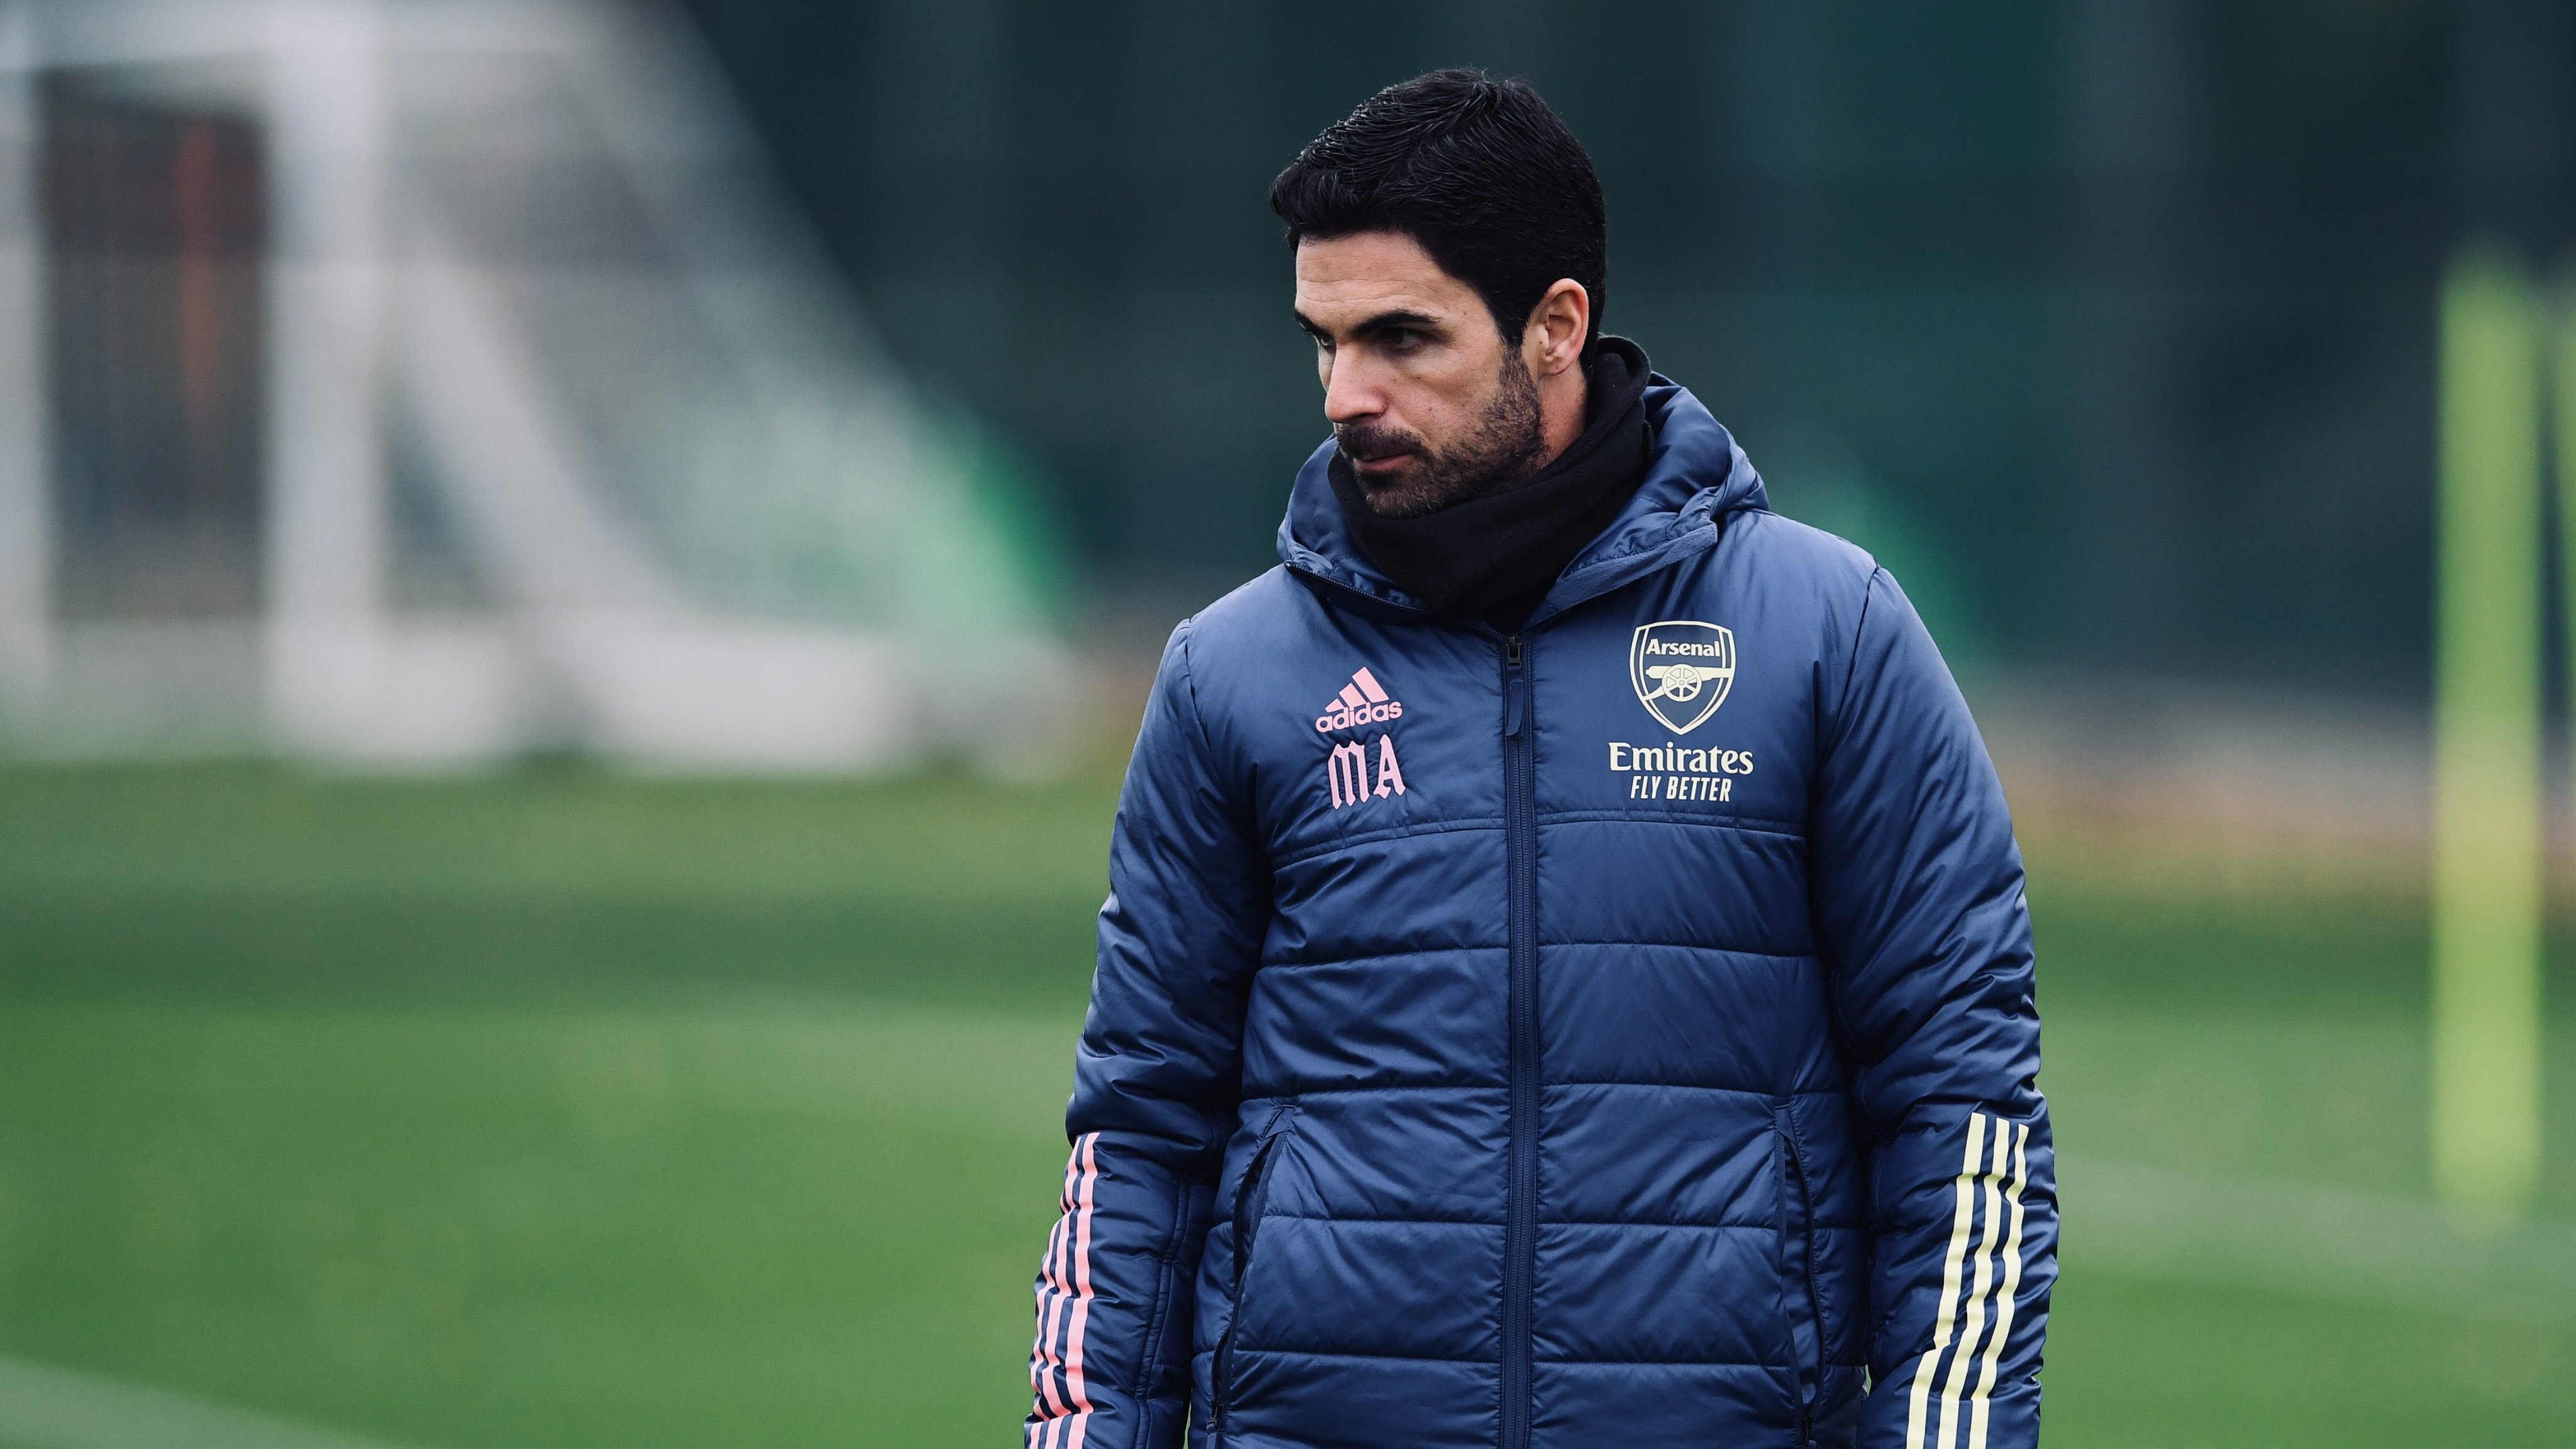 There are conversations about transfers going on at moment, admits Mikel Arteta